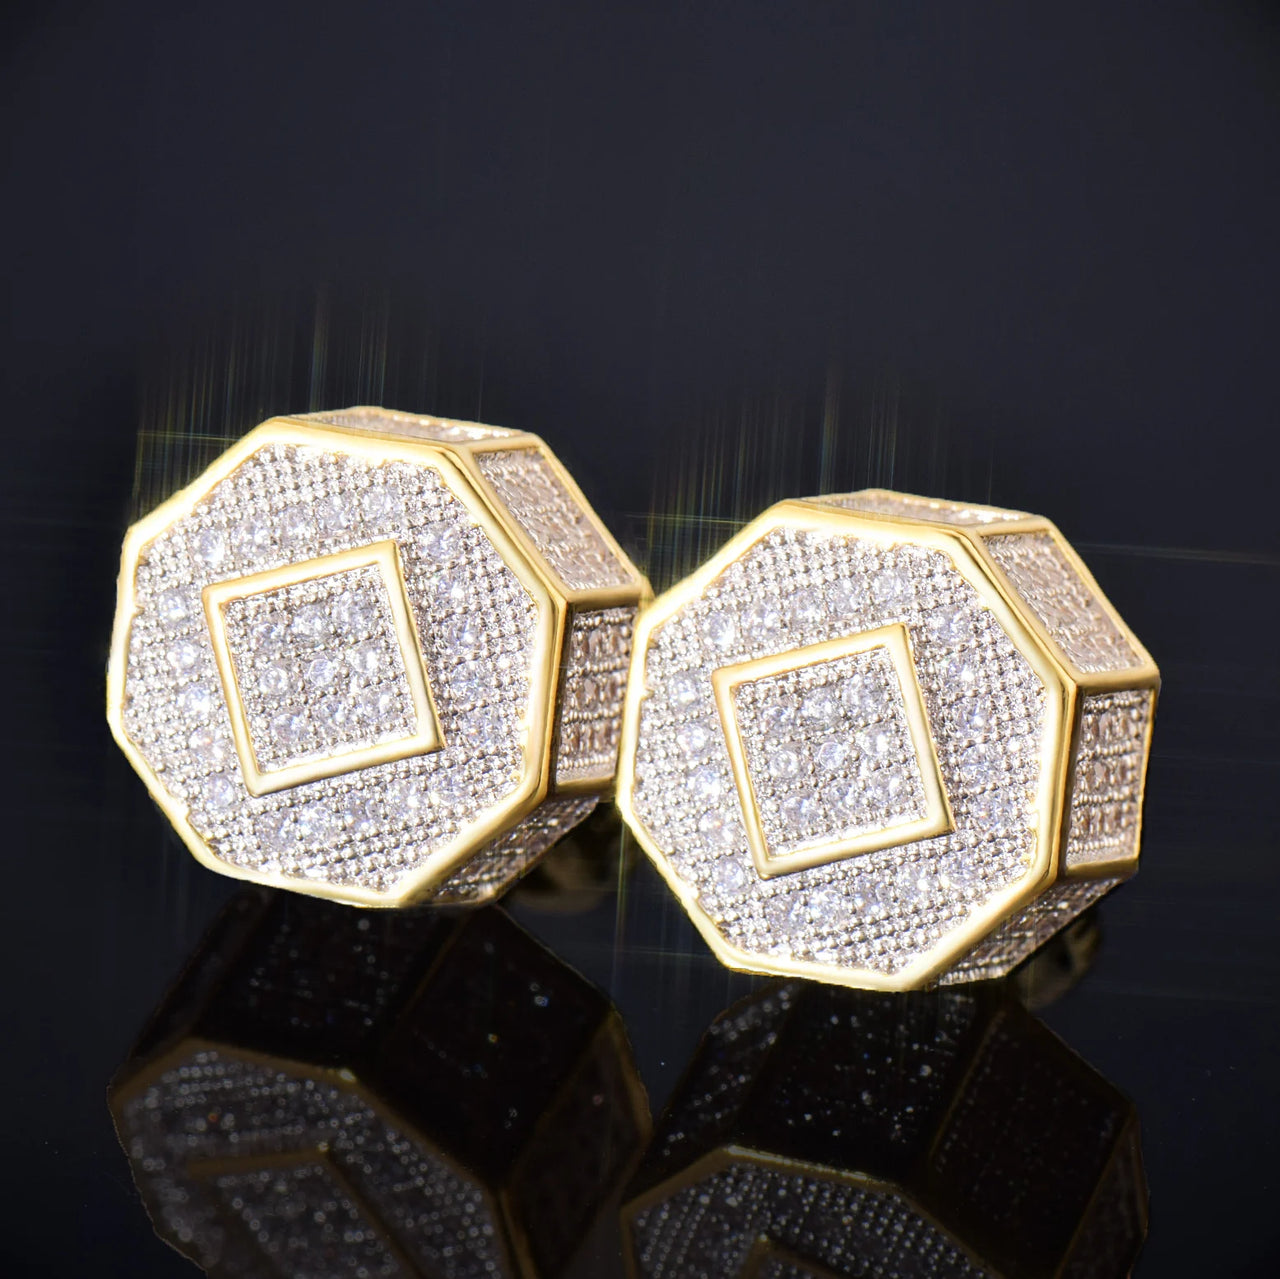 11mm Octagon Stud Earrings - Different Drips